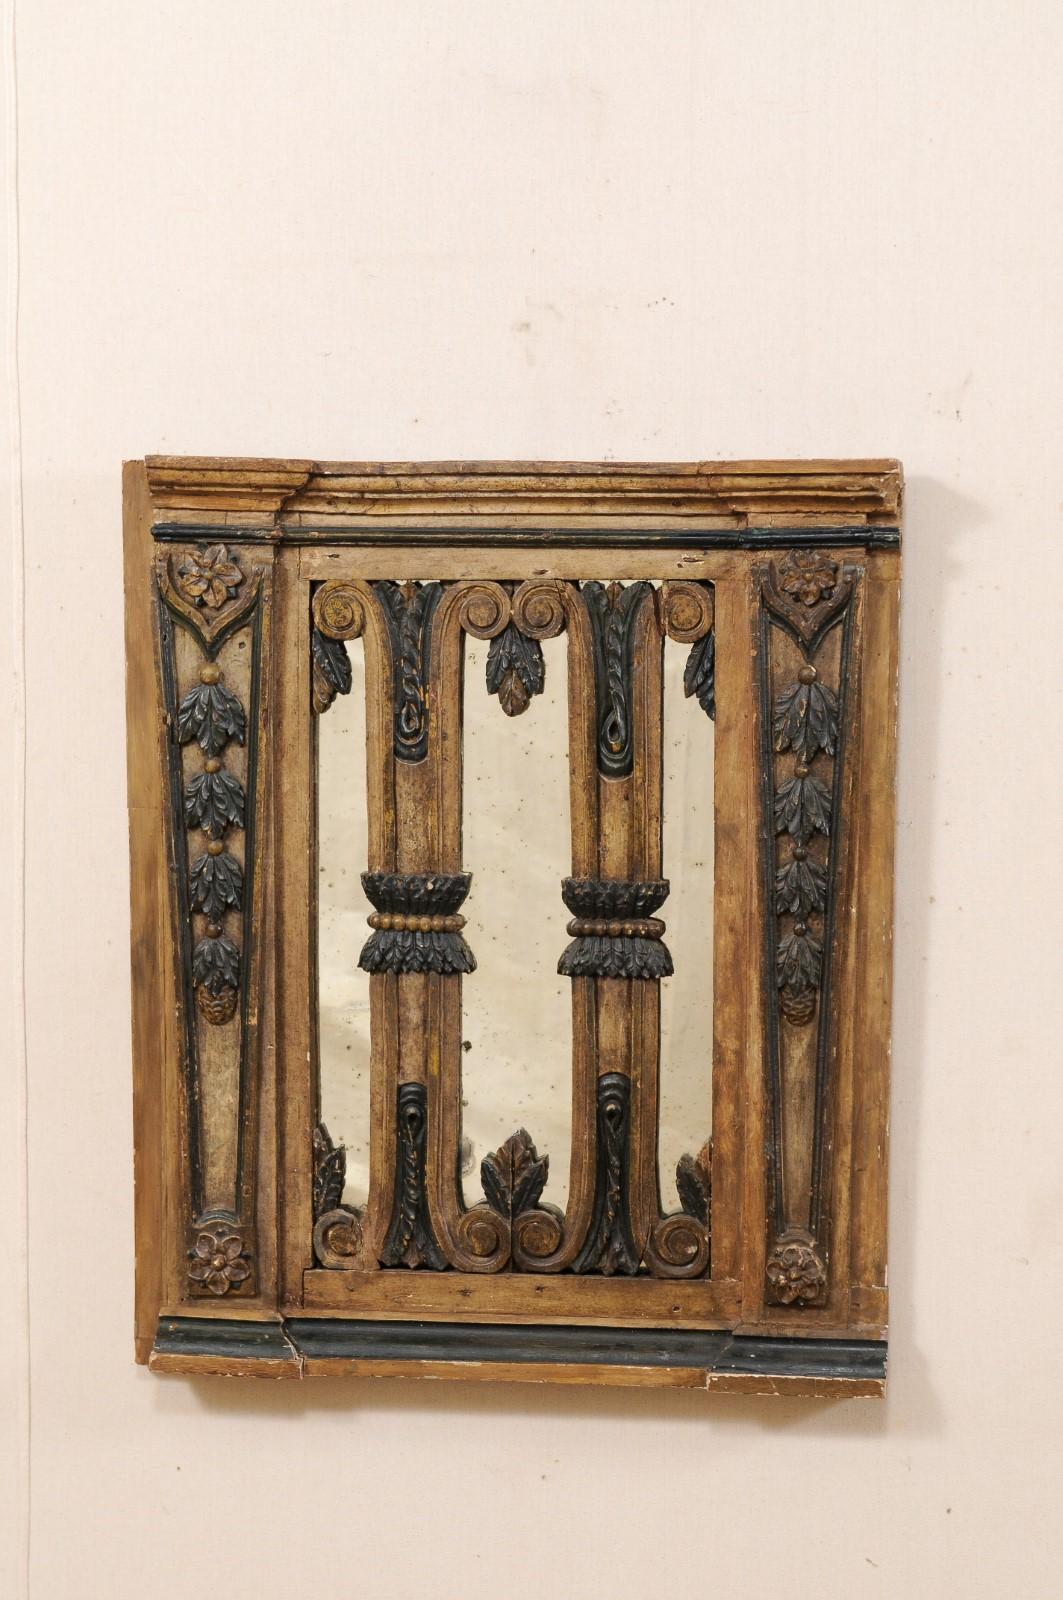 A one of a kind custom fashioned mirror which has been made from an early 19th century Portuguese gate. This antique wooden gate from Portugal acts as the frame from this custom designed mirror. The gate is craved with a floral and volute motif,